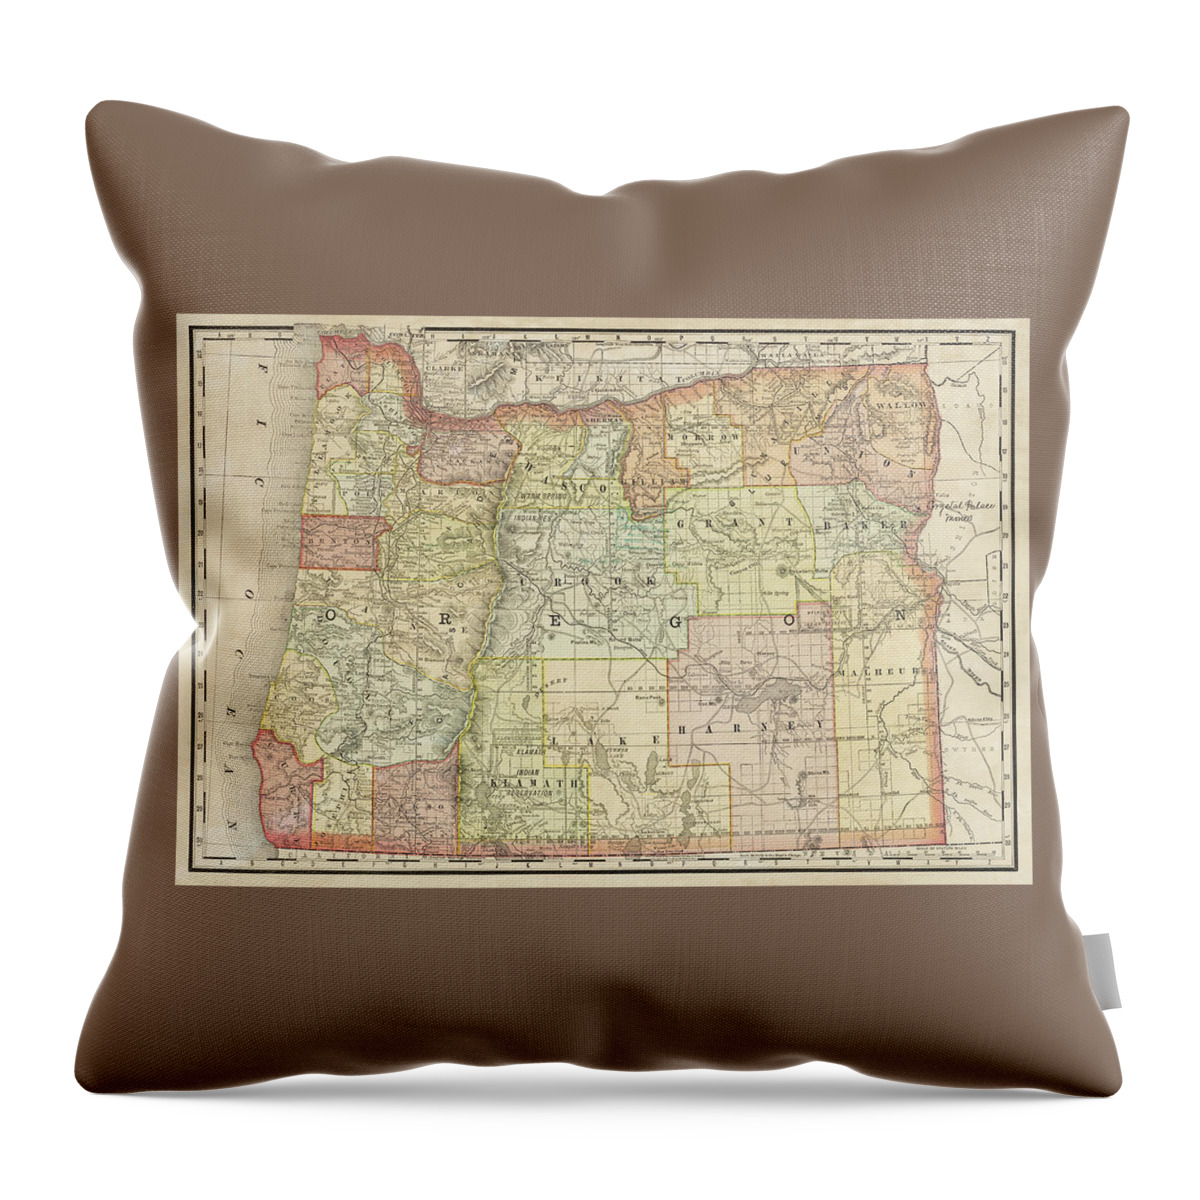 Oregon Throw Pillow featuring the photograph State of Oregon Vintage Map 1889 by Carol Japp